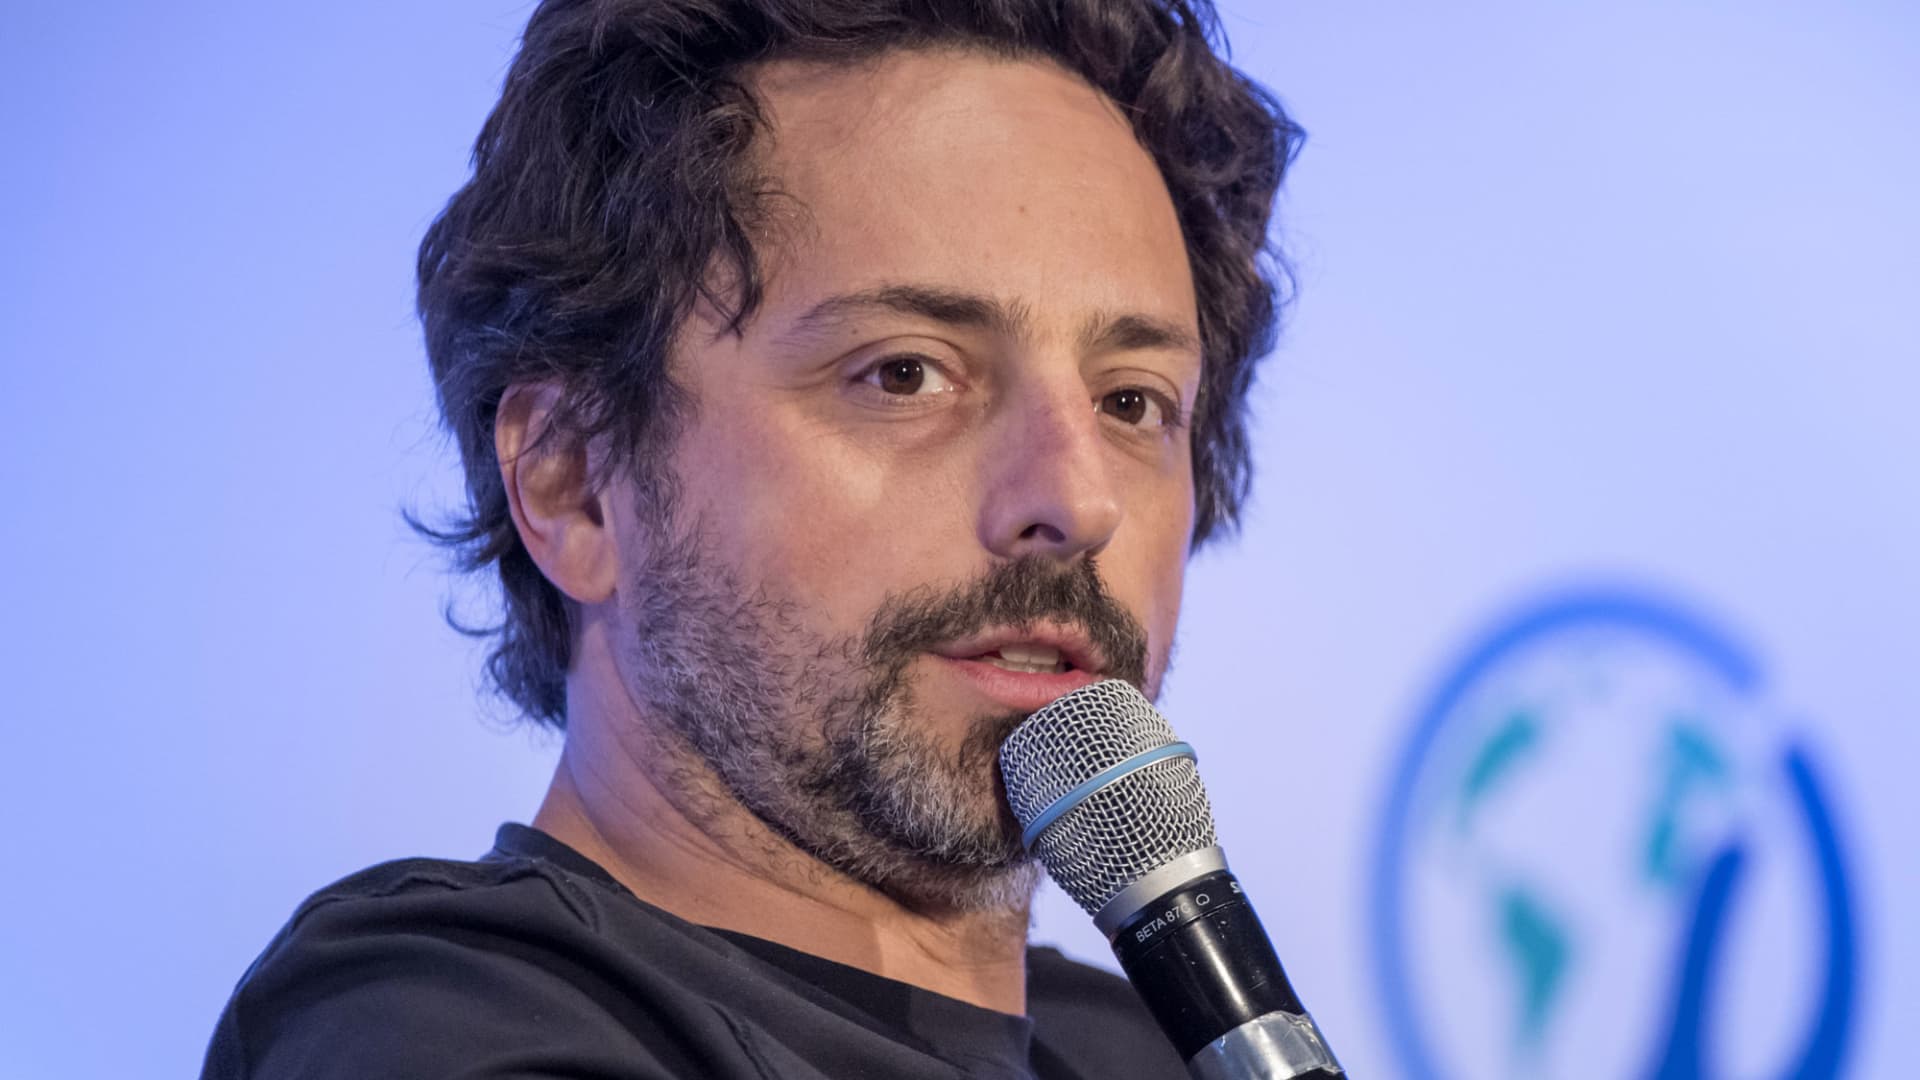 Google co-founder Sergey Brin says in rare public appearance that company 'definitely messed up' Gemini image launch